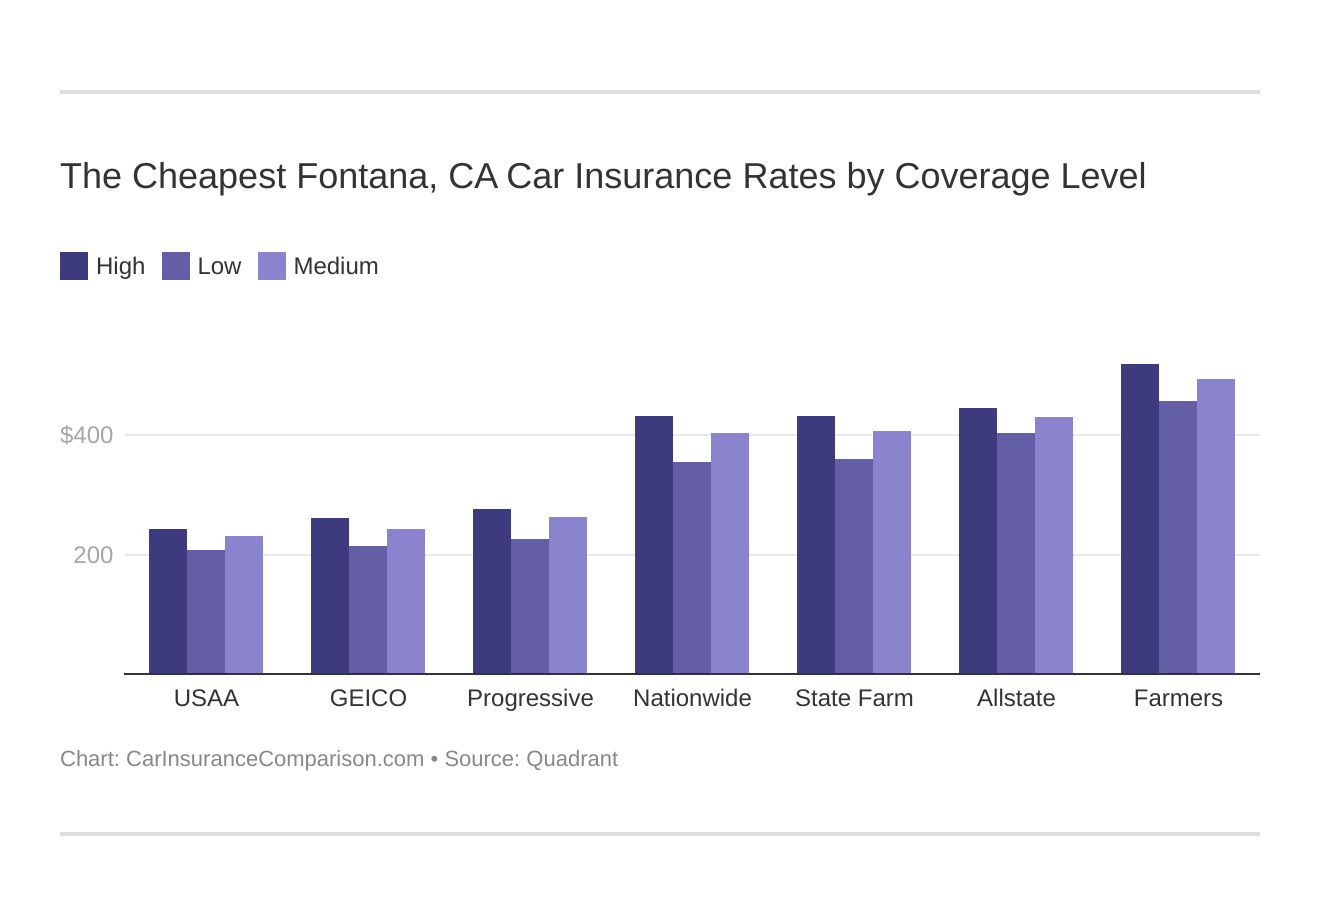 The Cheapest Fontana, CA Car Insurance Rates by Coverage Level